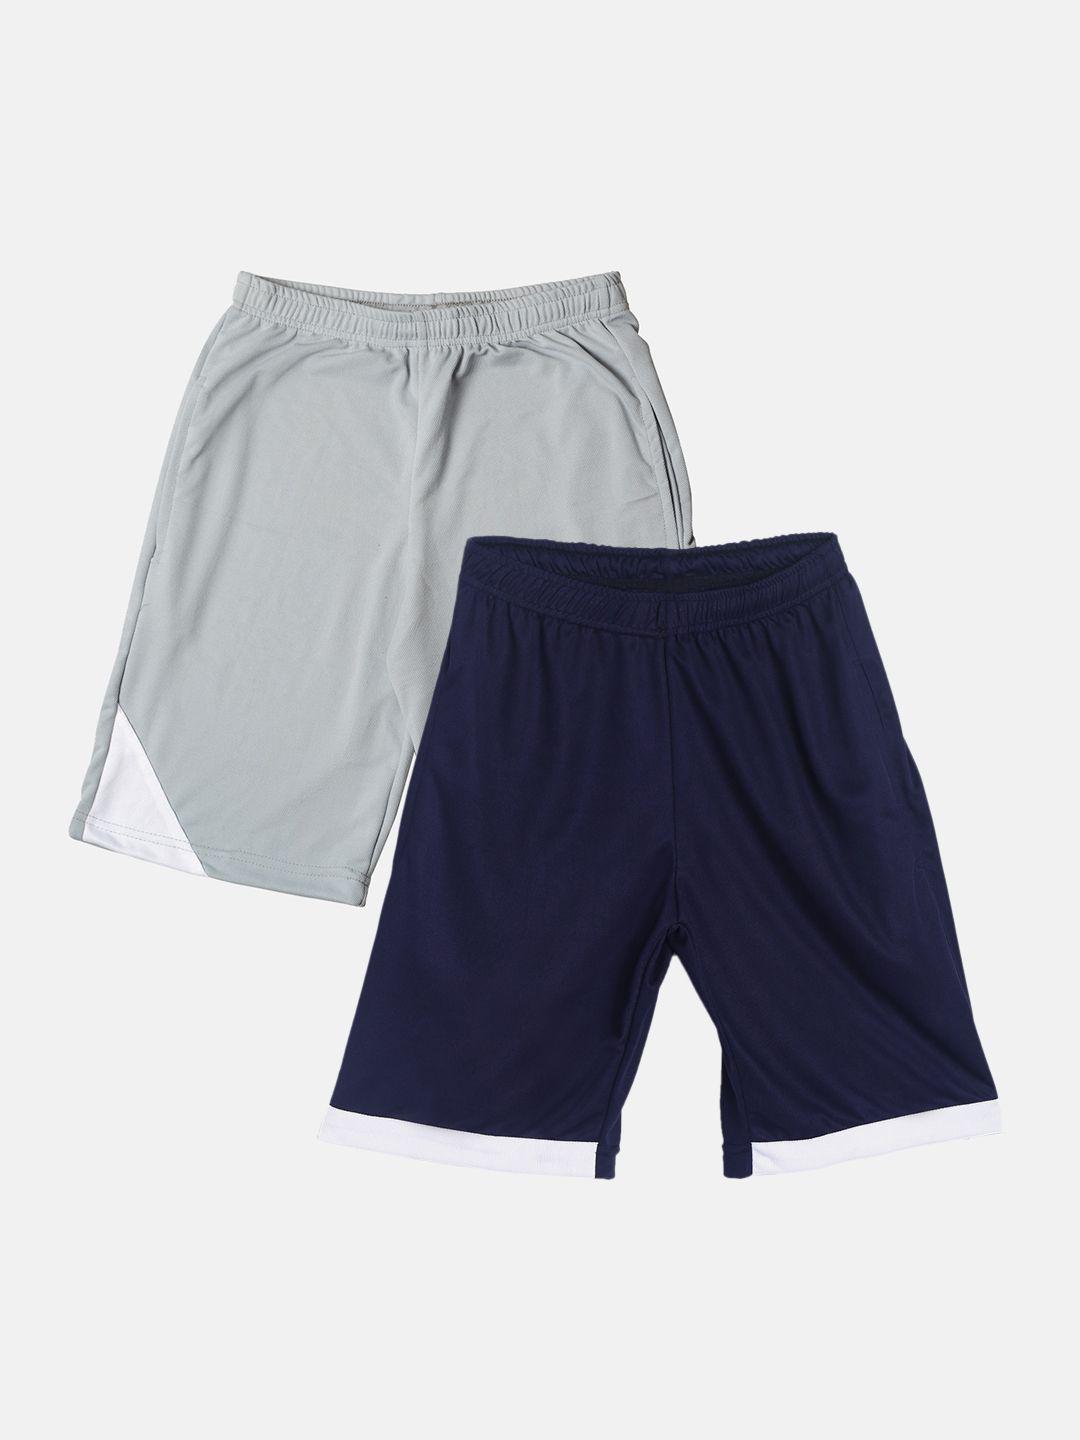 tiny hug boys pack of 2 navy blue & grey high-rise outdoor sports shorts